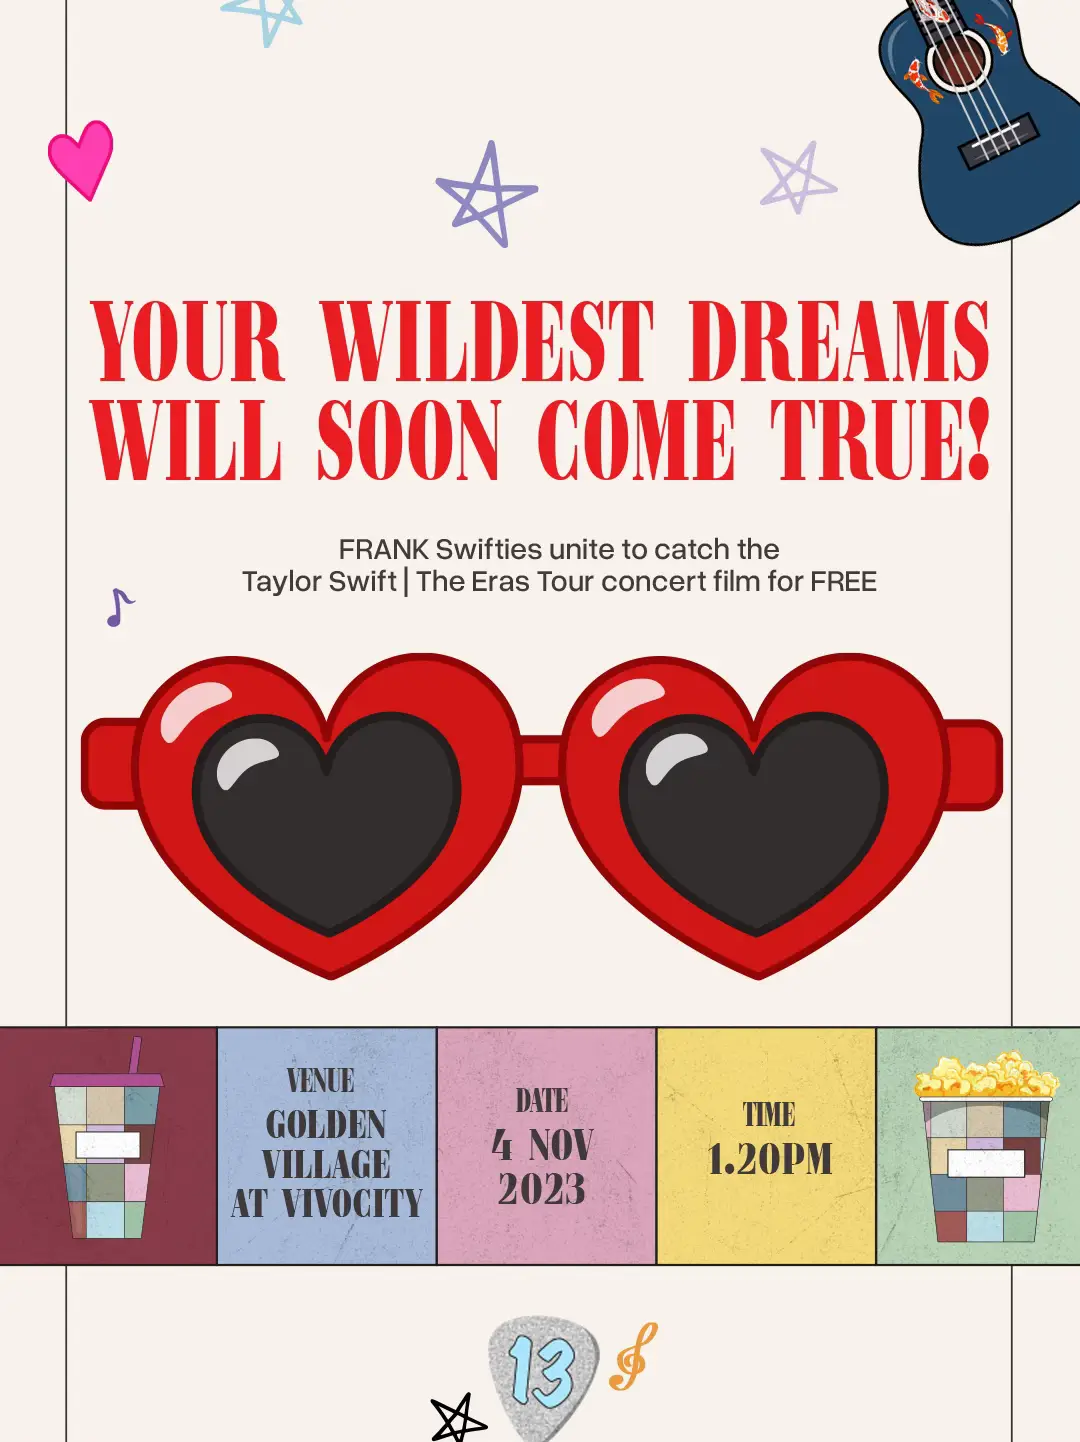 Swifties, this one's for you! 💖 Tumble 'Out of the Woods' with this GV  exclusive 𝐓𝐚𝐲𝐥𝐨𝐫 𝐒𝐰𝐢𝐟𝐭, 𝐓𝐡𝐞 𝐄𝐫𝐚𝐬 𝐓𝐨𝐮𝐫 tumbler!  Pre-order the combo…